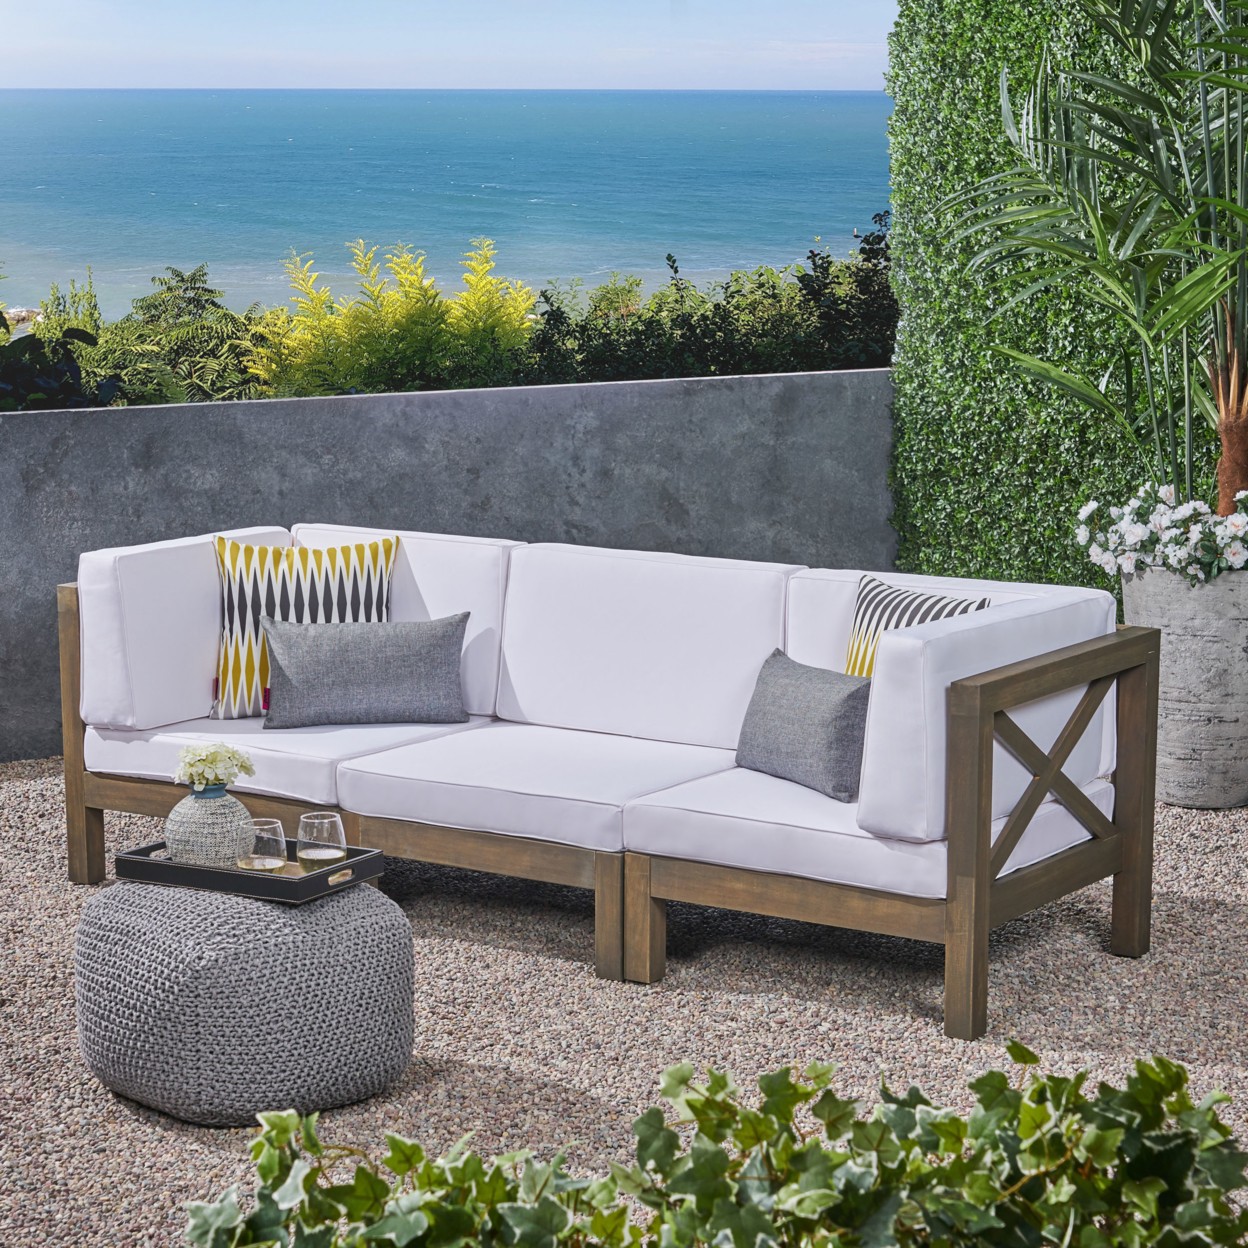 Great Deal Furniture Keith Outdoor Sectional Sofa Set 3-Seater Acacia Wood Water-Resistant Cushions - Dark Gray